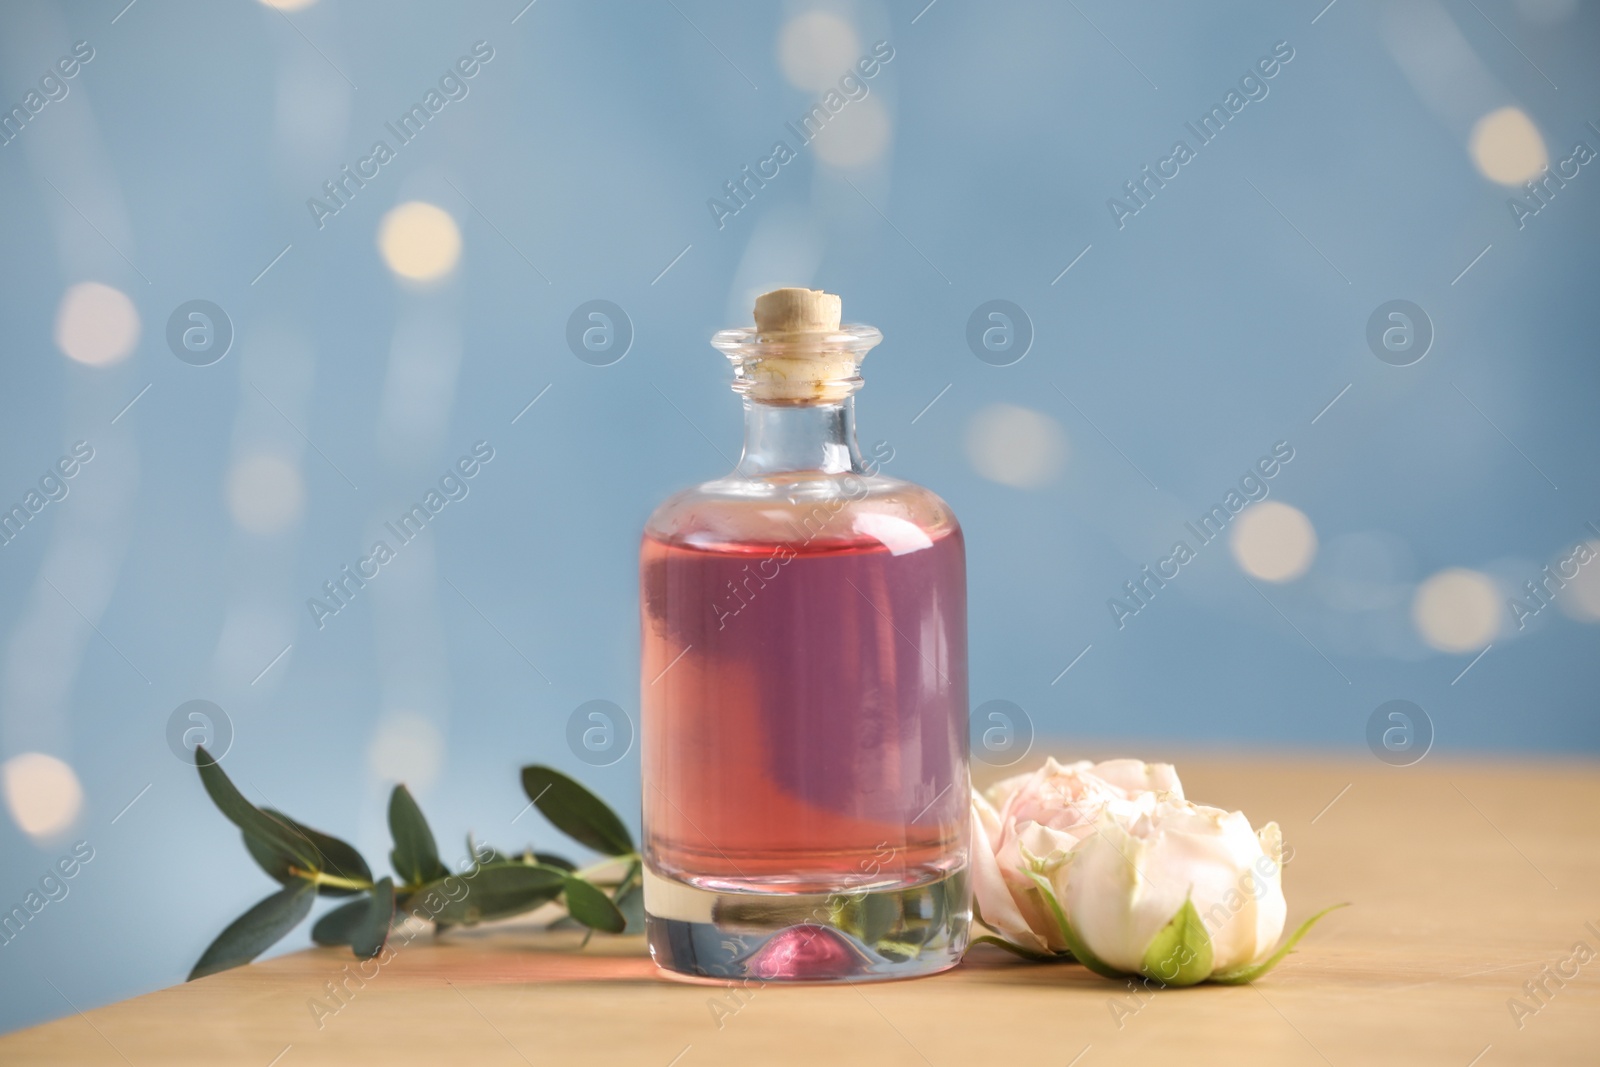 Photo of Bottle of essential oil, roses and green branch on wooden table against blurred lights